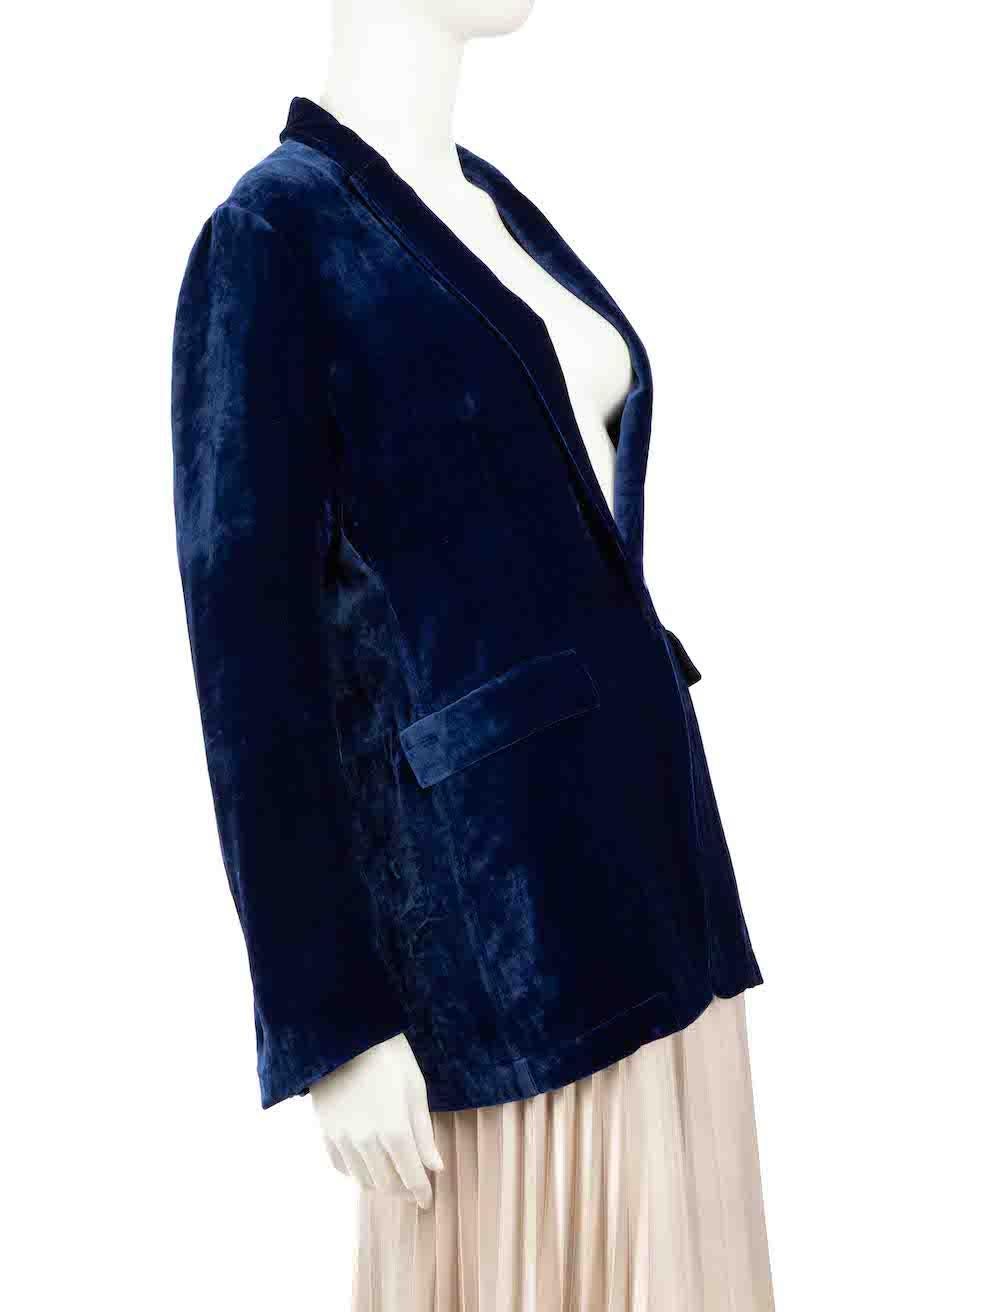 CONDITION is Very good. Minimal wear to jacket is evident. Minimal discoloured mark to right sleeve on this used Forte_Forte designer resale item.
 
 
 
 Details
 
 
 Blue
 
 Velvet
 
 Blazer
 
 Snap button fastening
 
 2x Side pockets
 
 
 
 
 
